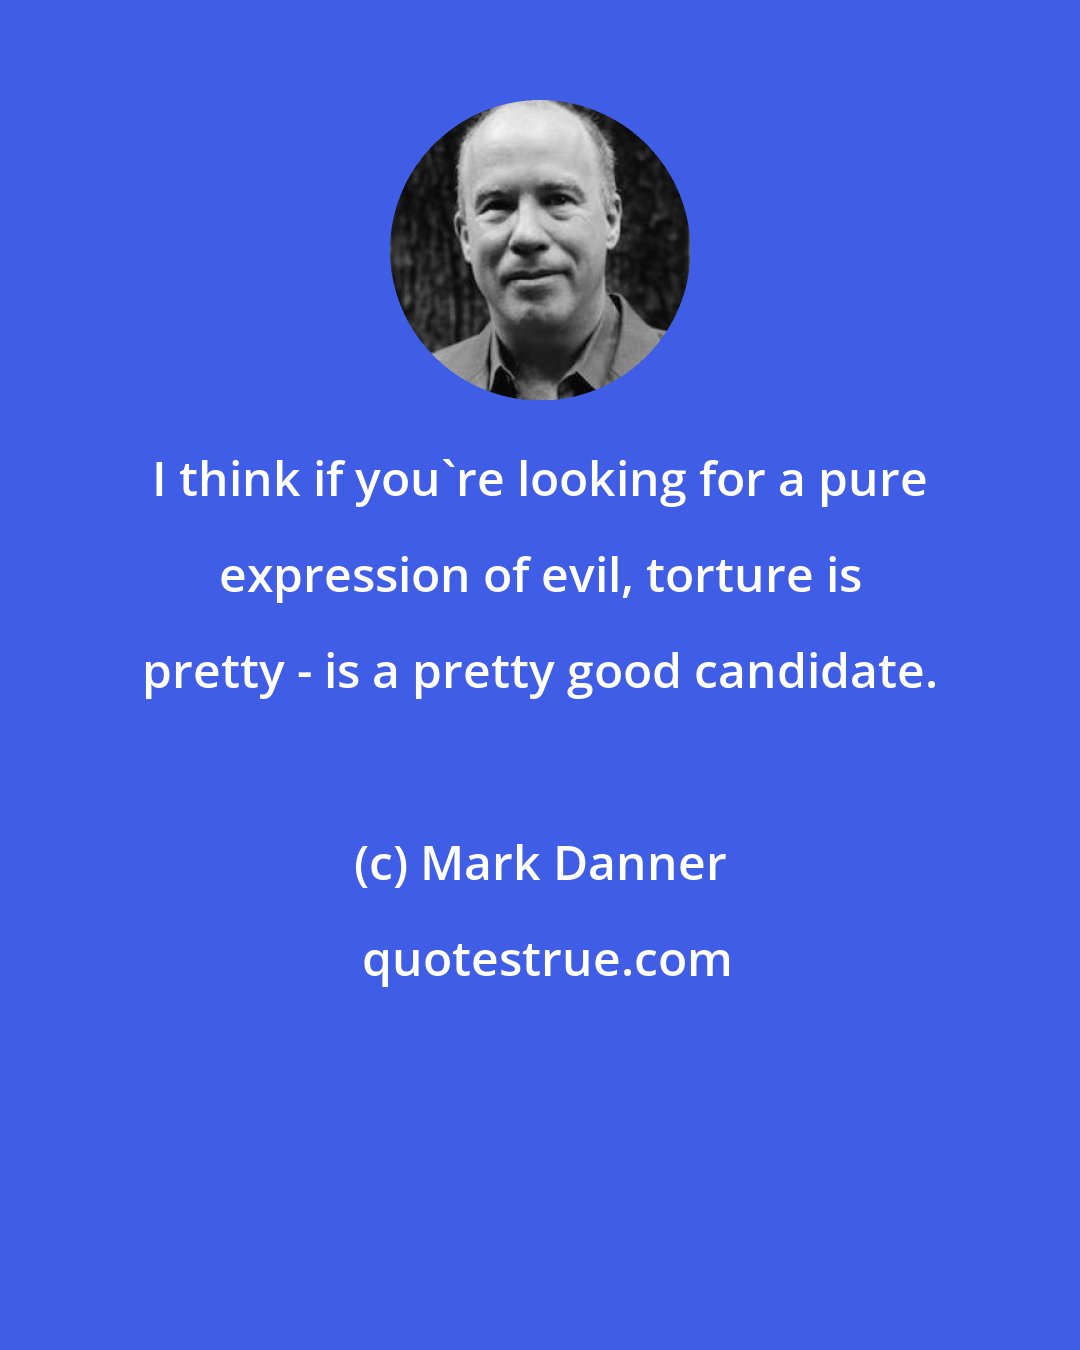 Mark Danner: I think if you're looking for a pure expression of evil, torture is pretty - is a pretty good candidate.